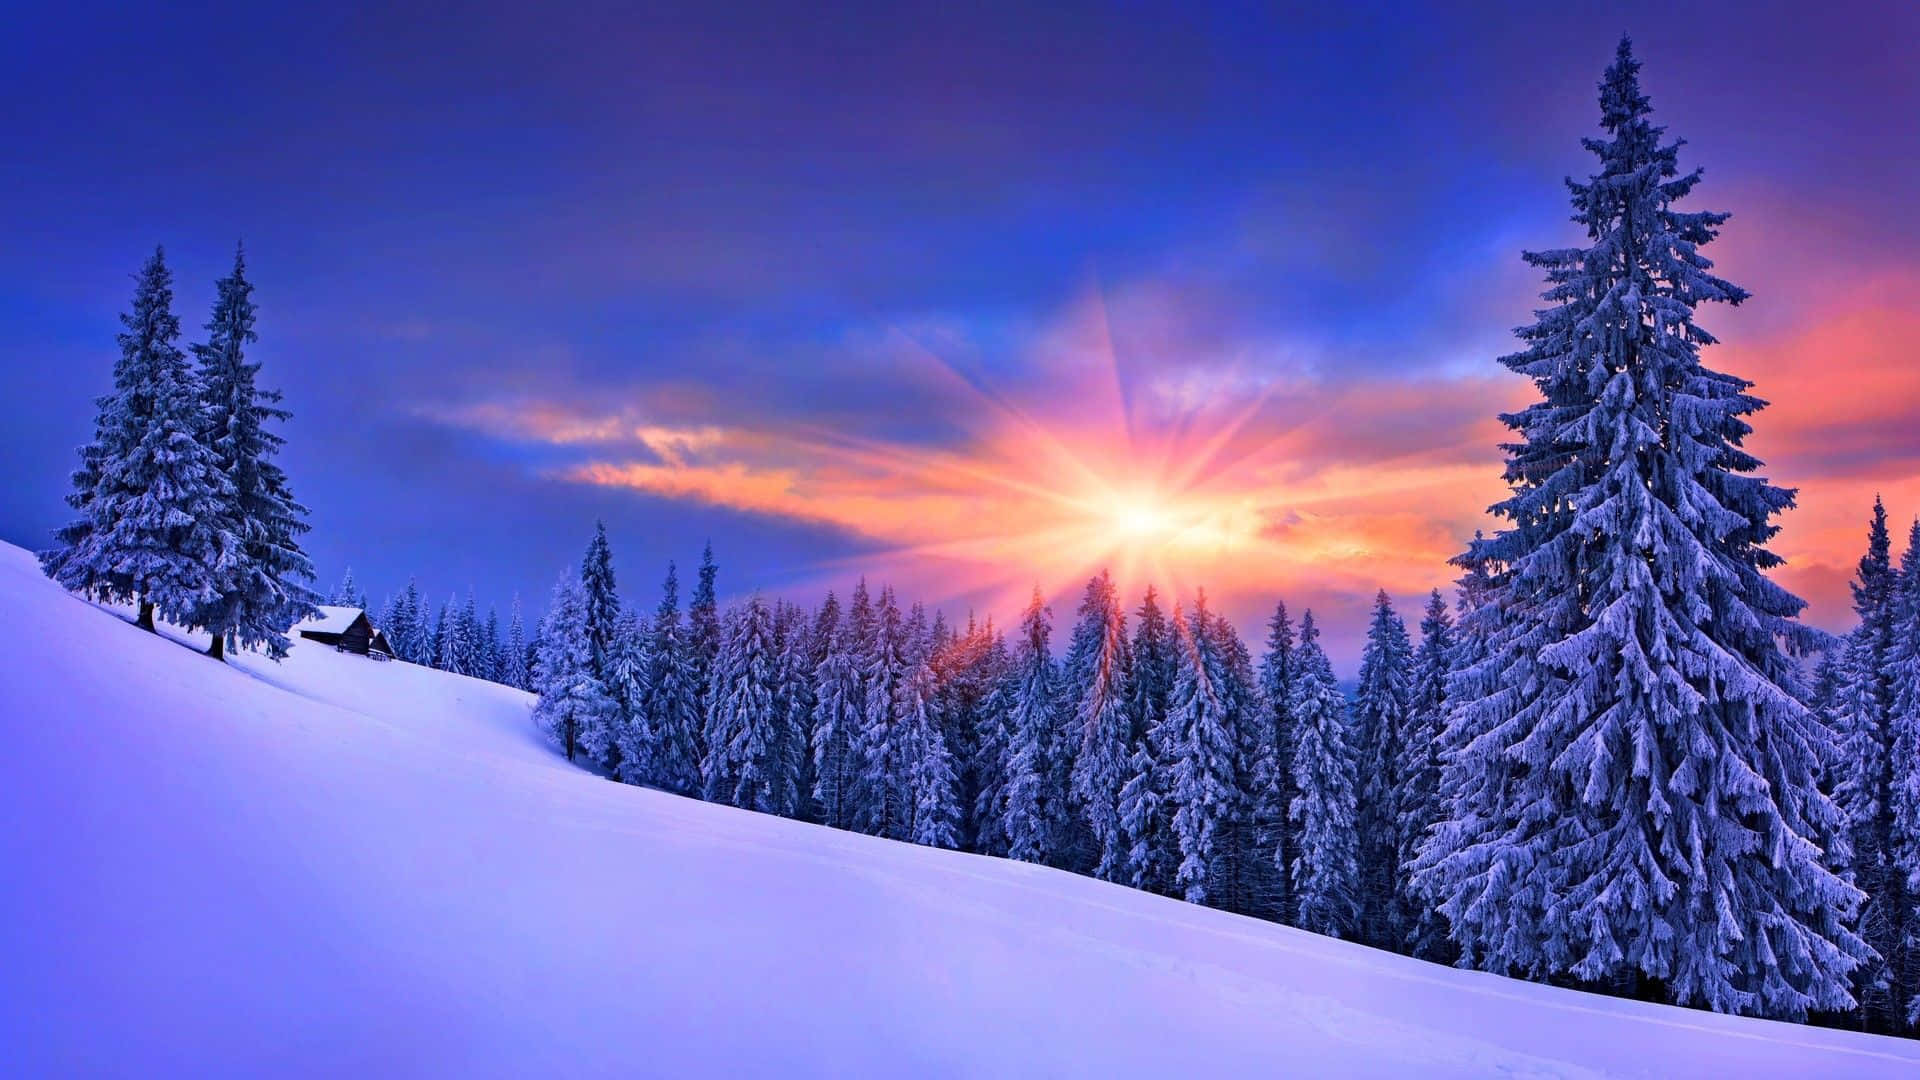 Enjoy this magical winter scenery